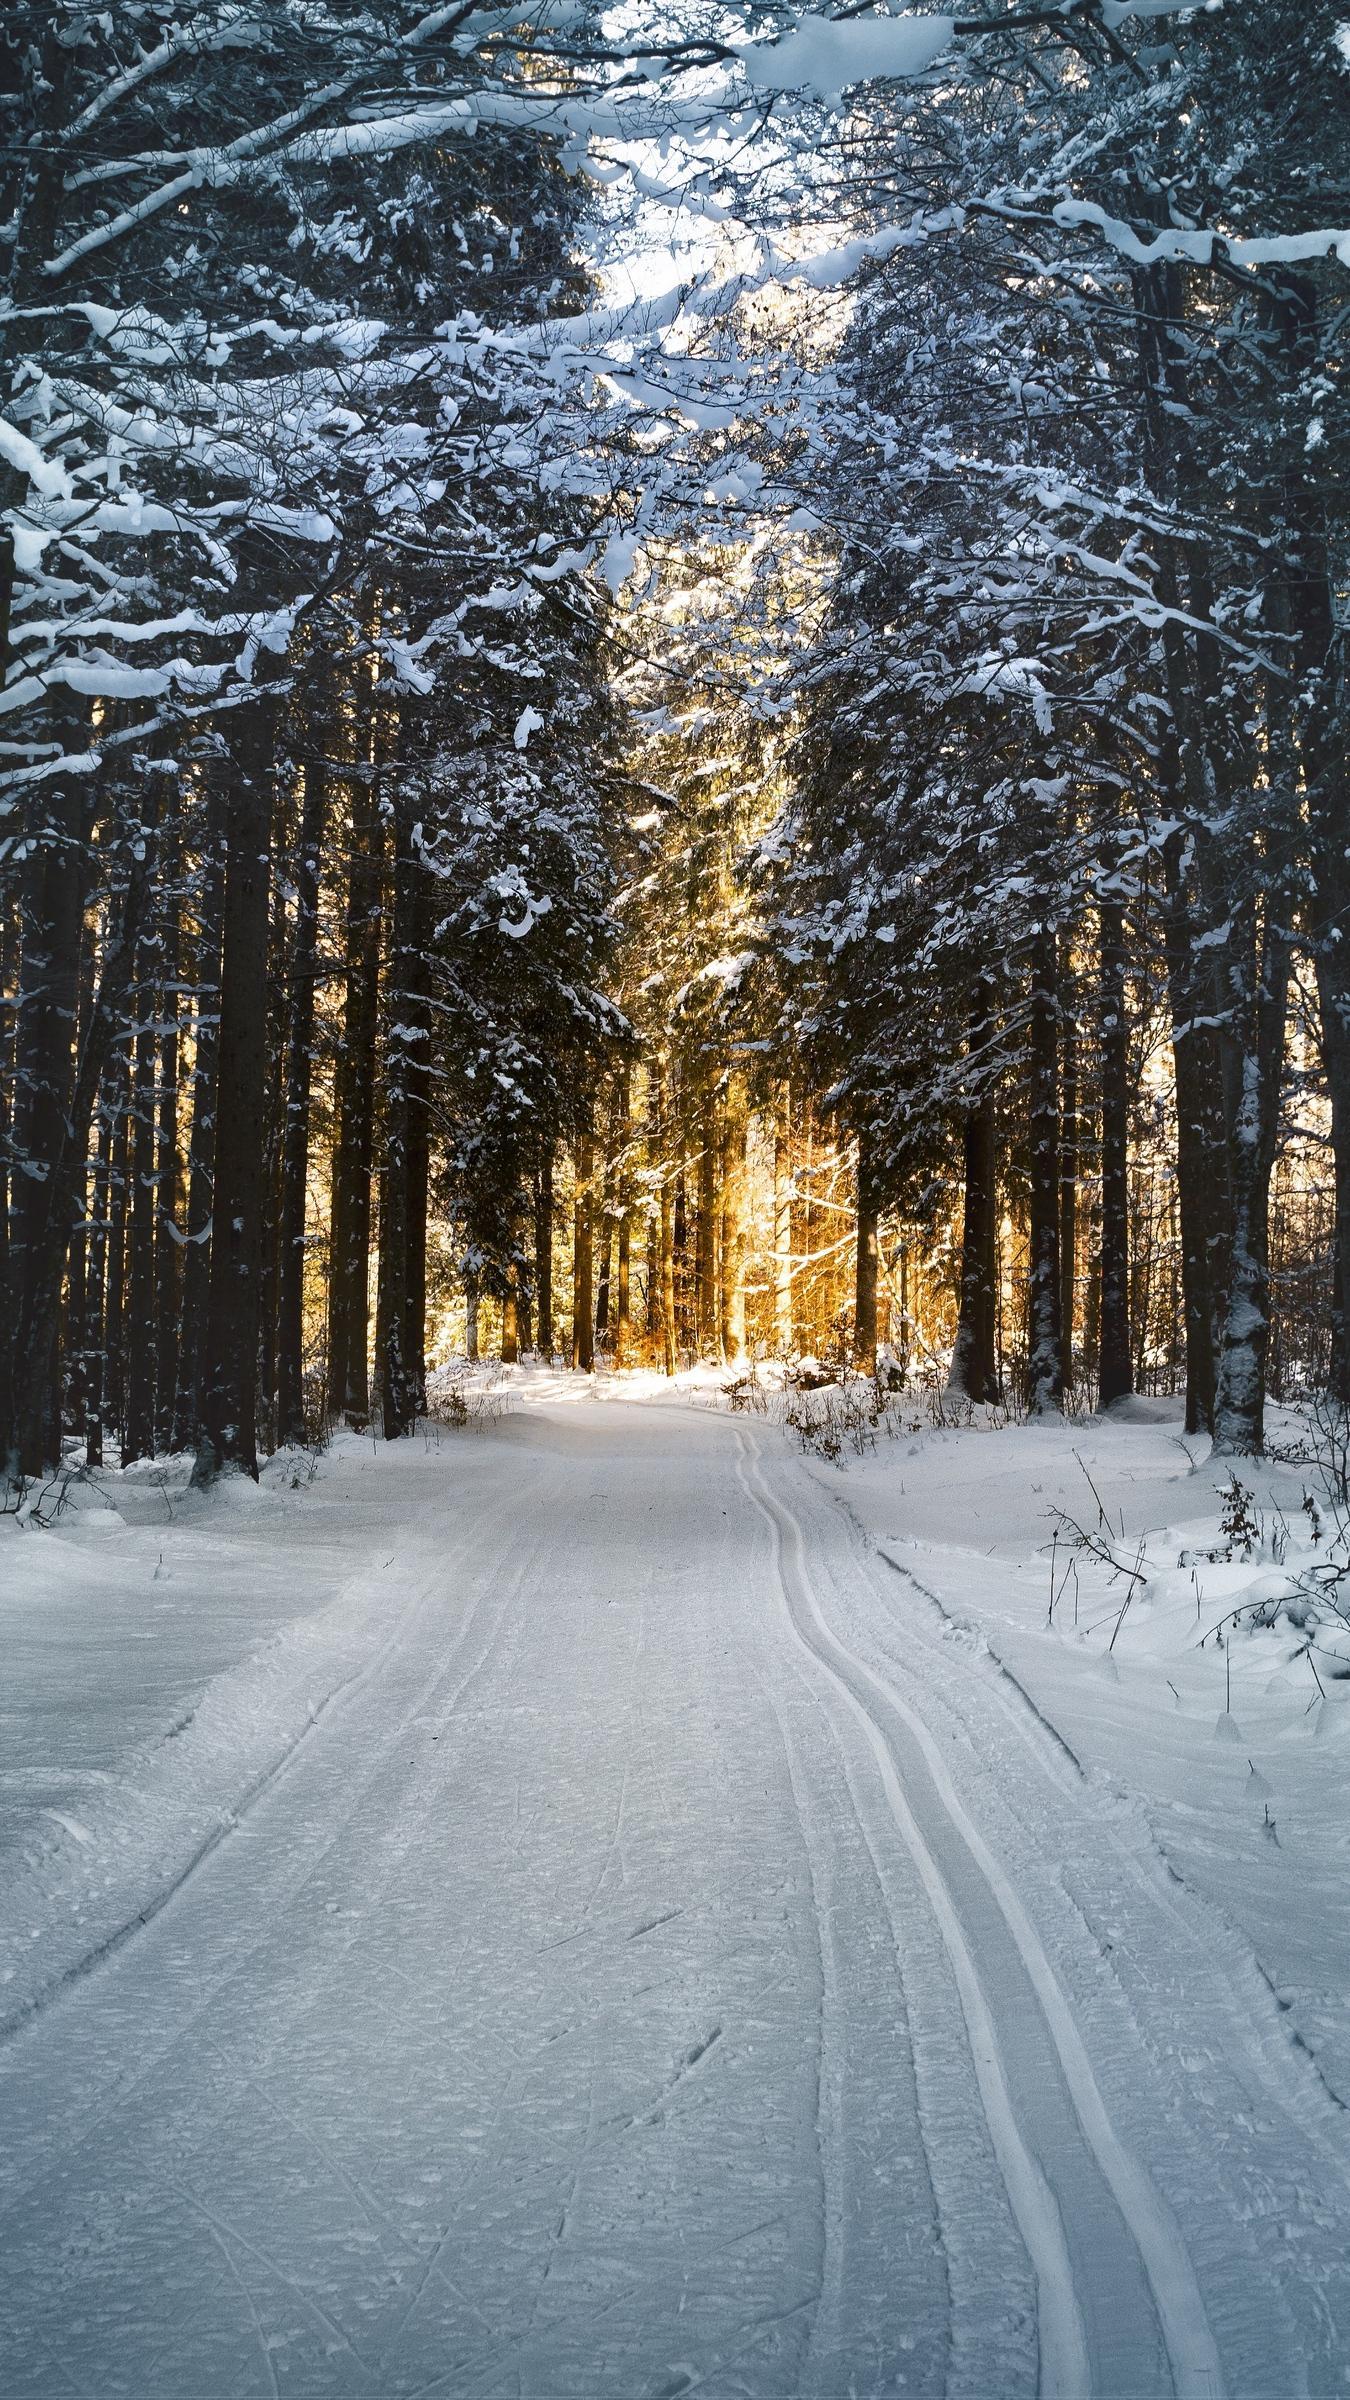 Download wallpaper 1350x2400 winter, trees, forest, road iphone